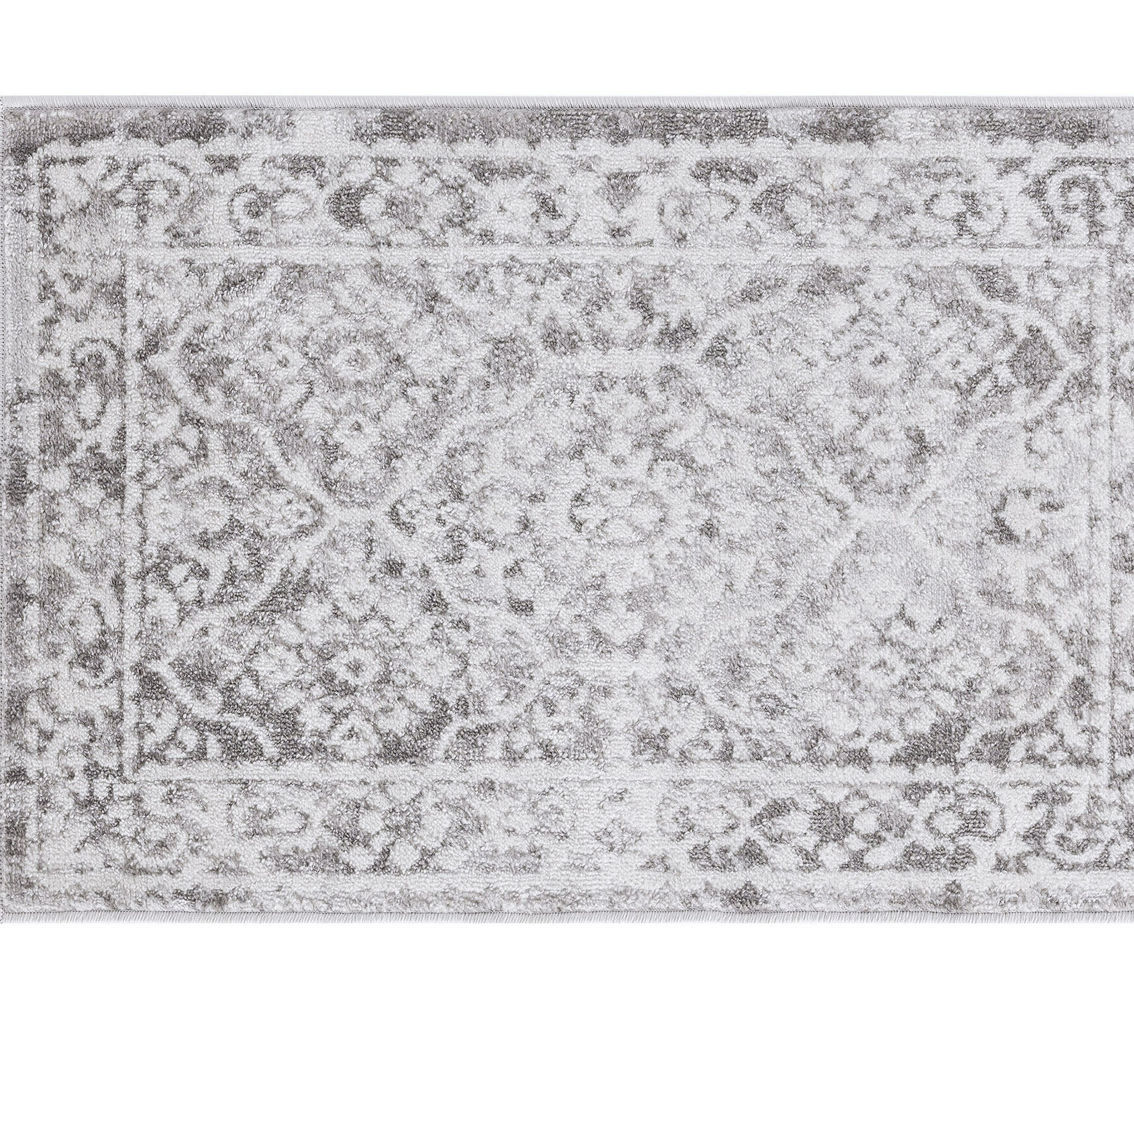 Tayse Jersey Traditional Oriental Area Rug - Image 2 of 5